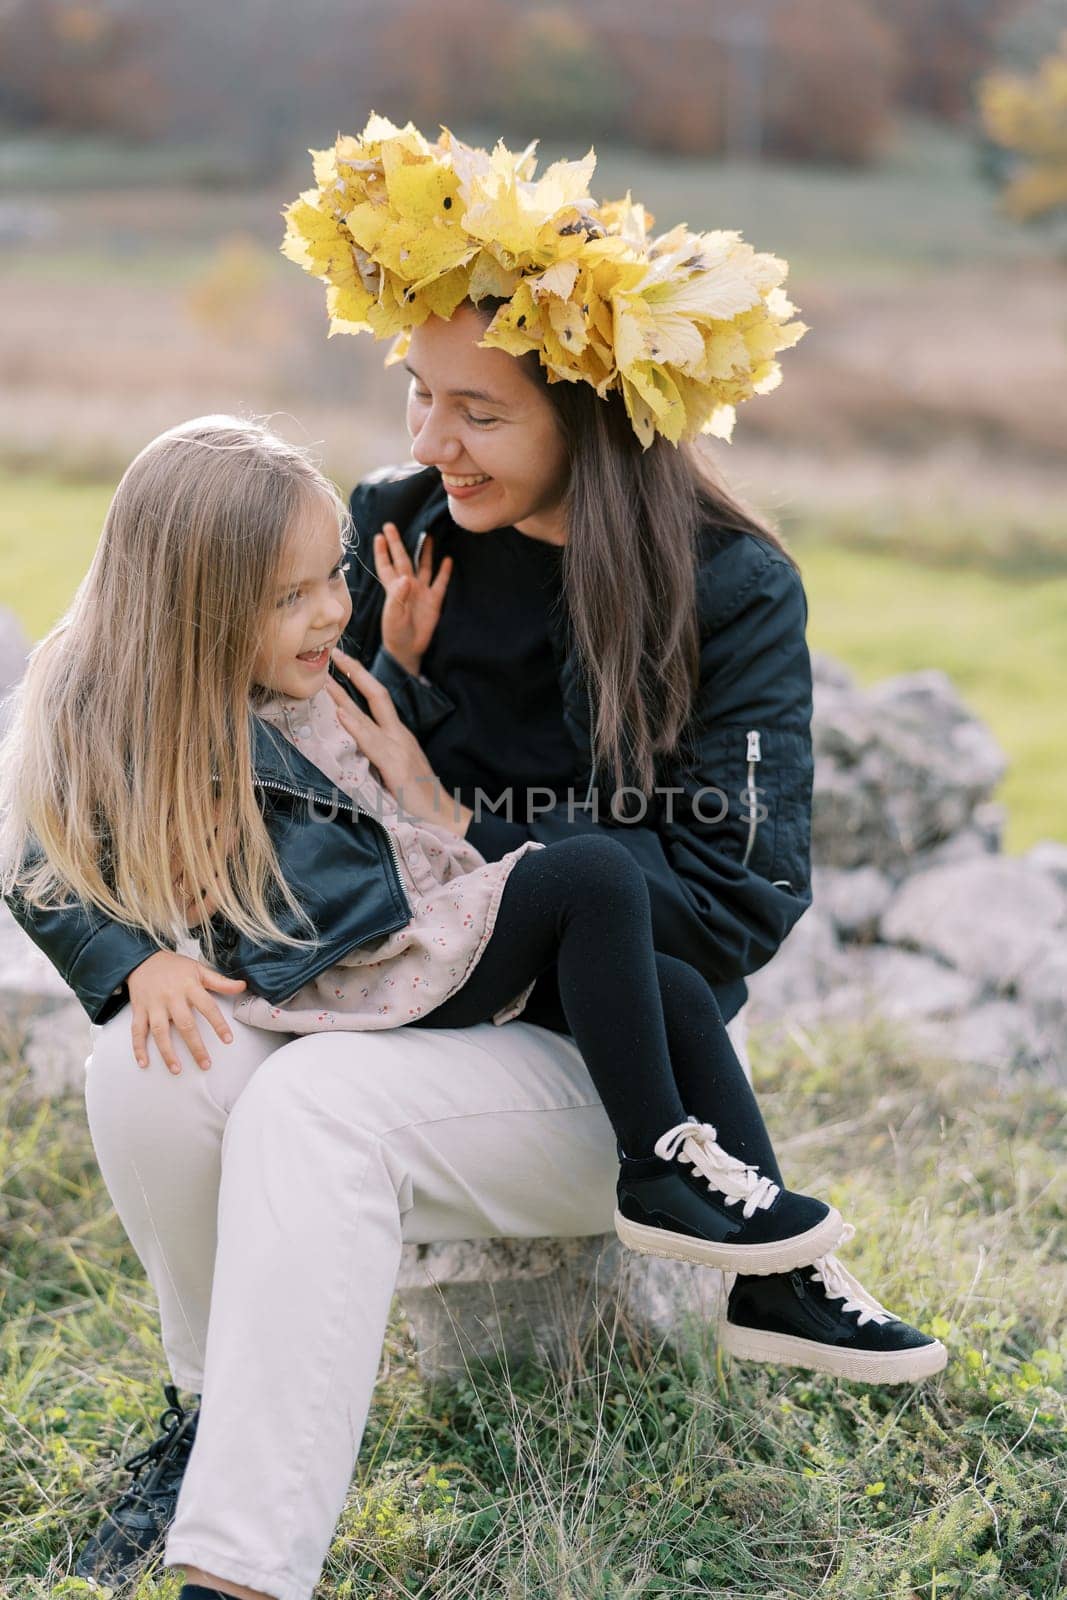 Smiling mother in a wreath of yellow leaves tickles a laughing little girl sitting on her lap on the lawn. High quality photo